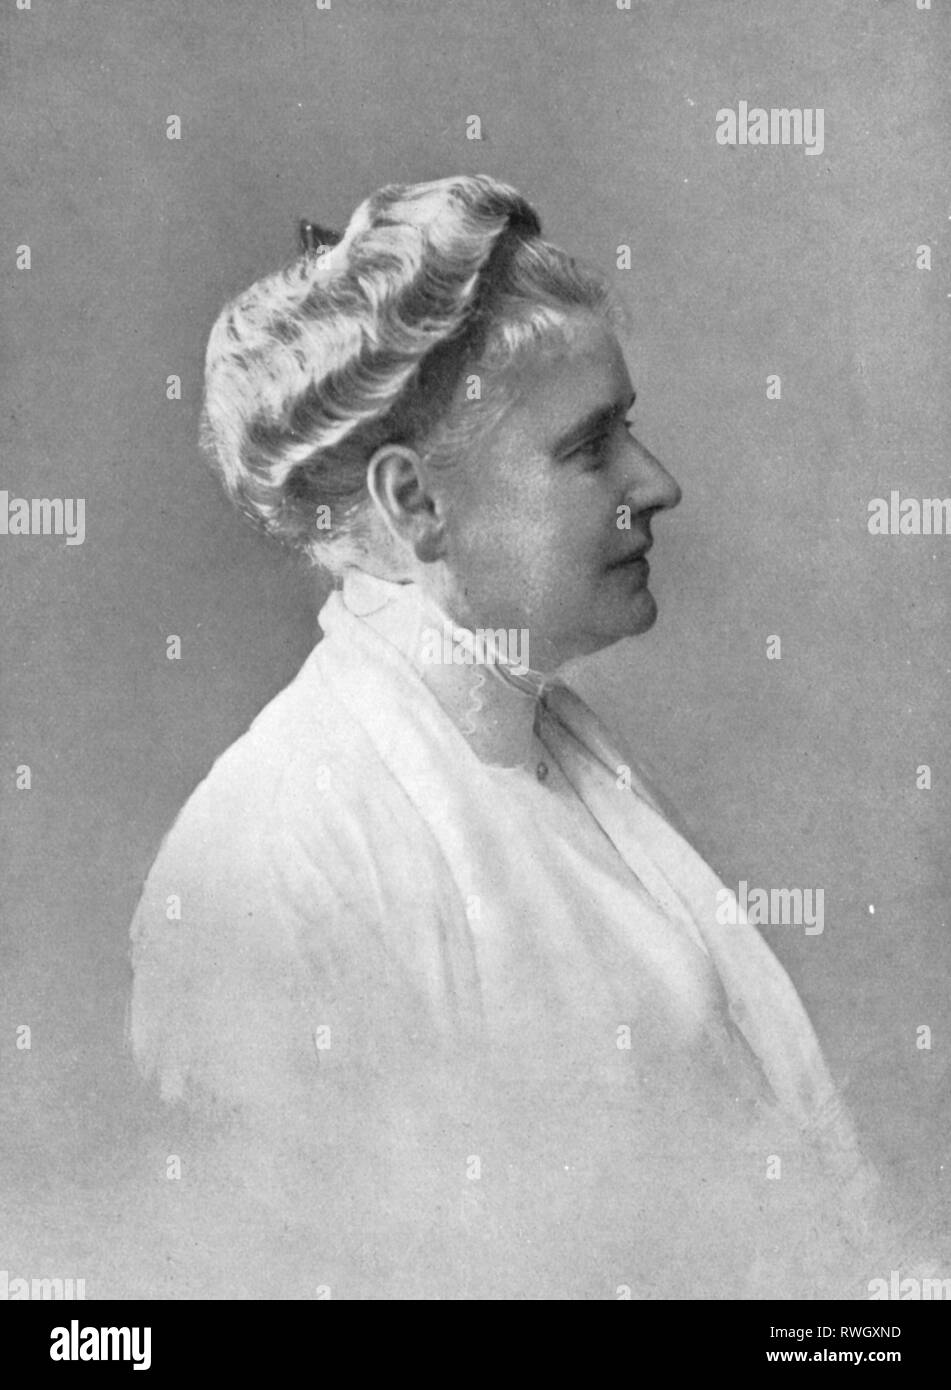 Sievert-Brausewetter, Gertrud, German authoress / writer, portrait, circa 1910, Additional-Rights-Clearance-Info-Not-Available Stock Photo